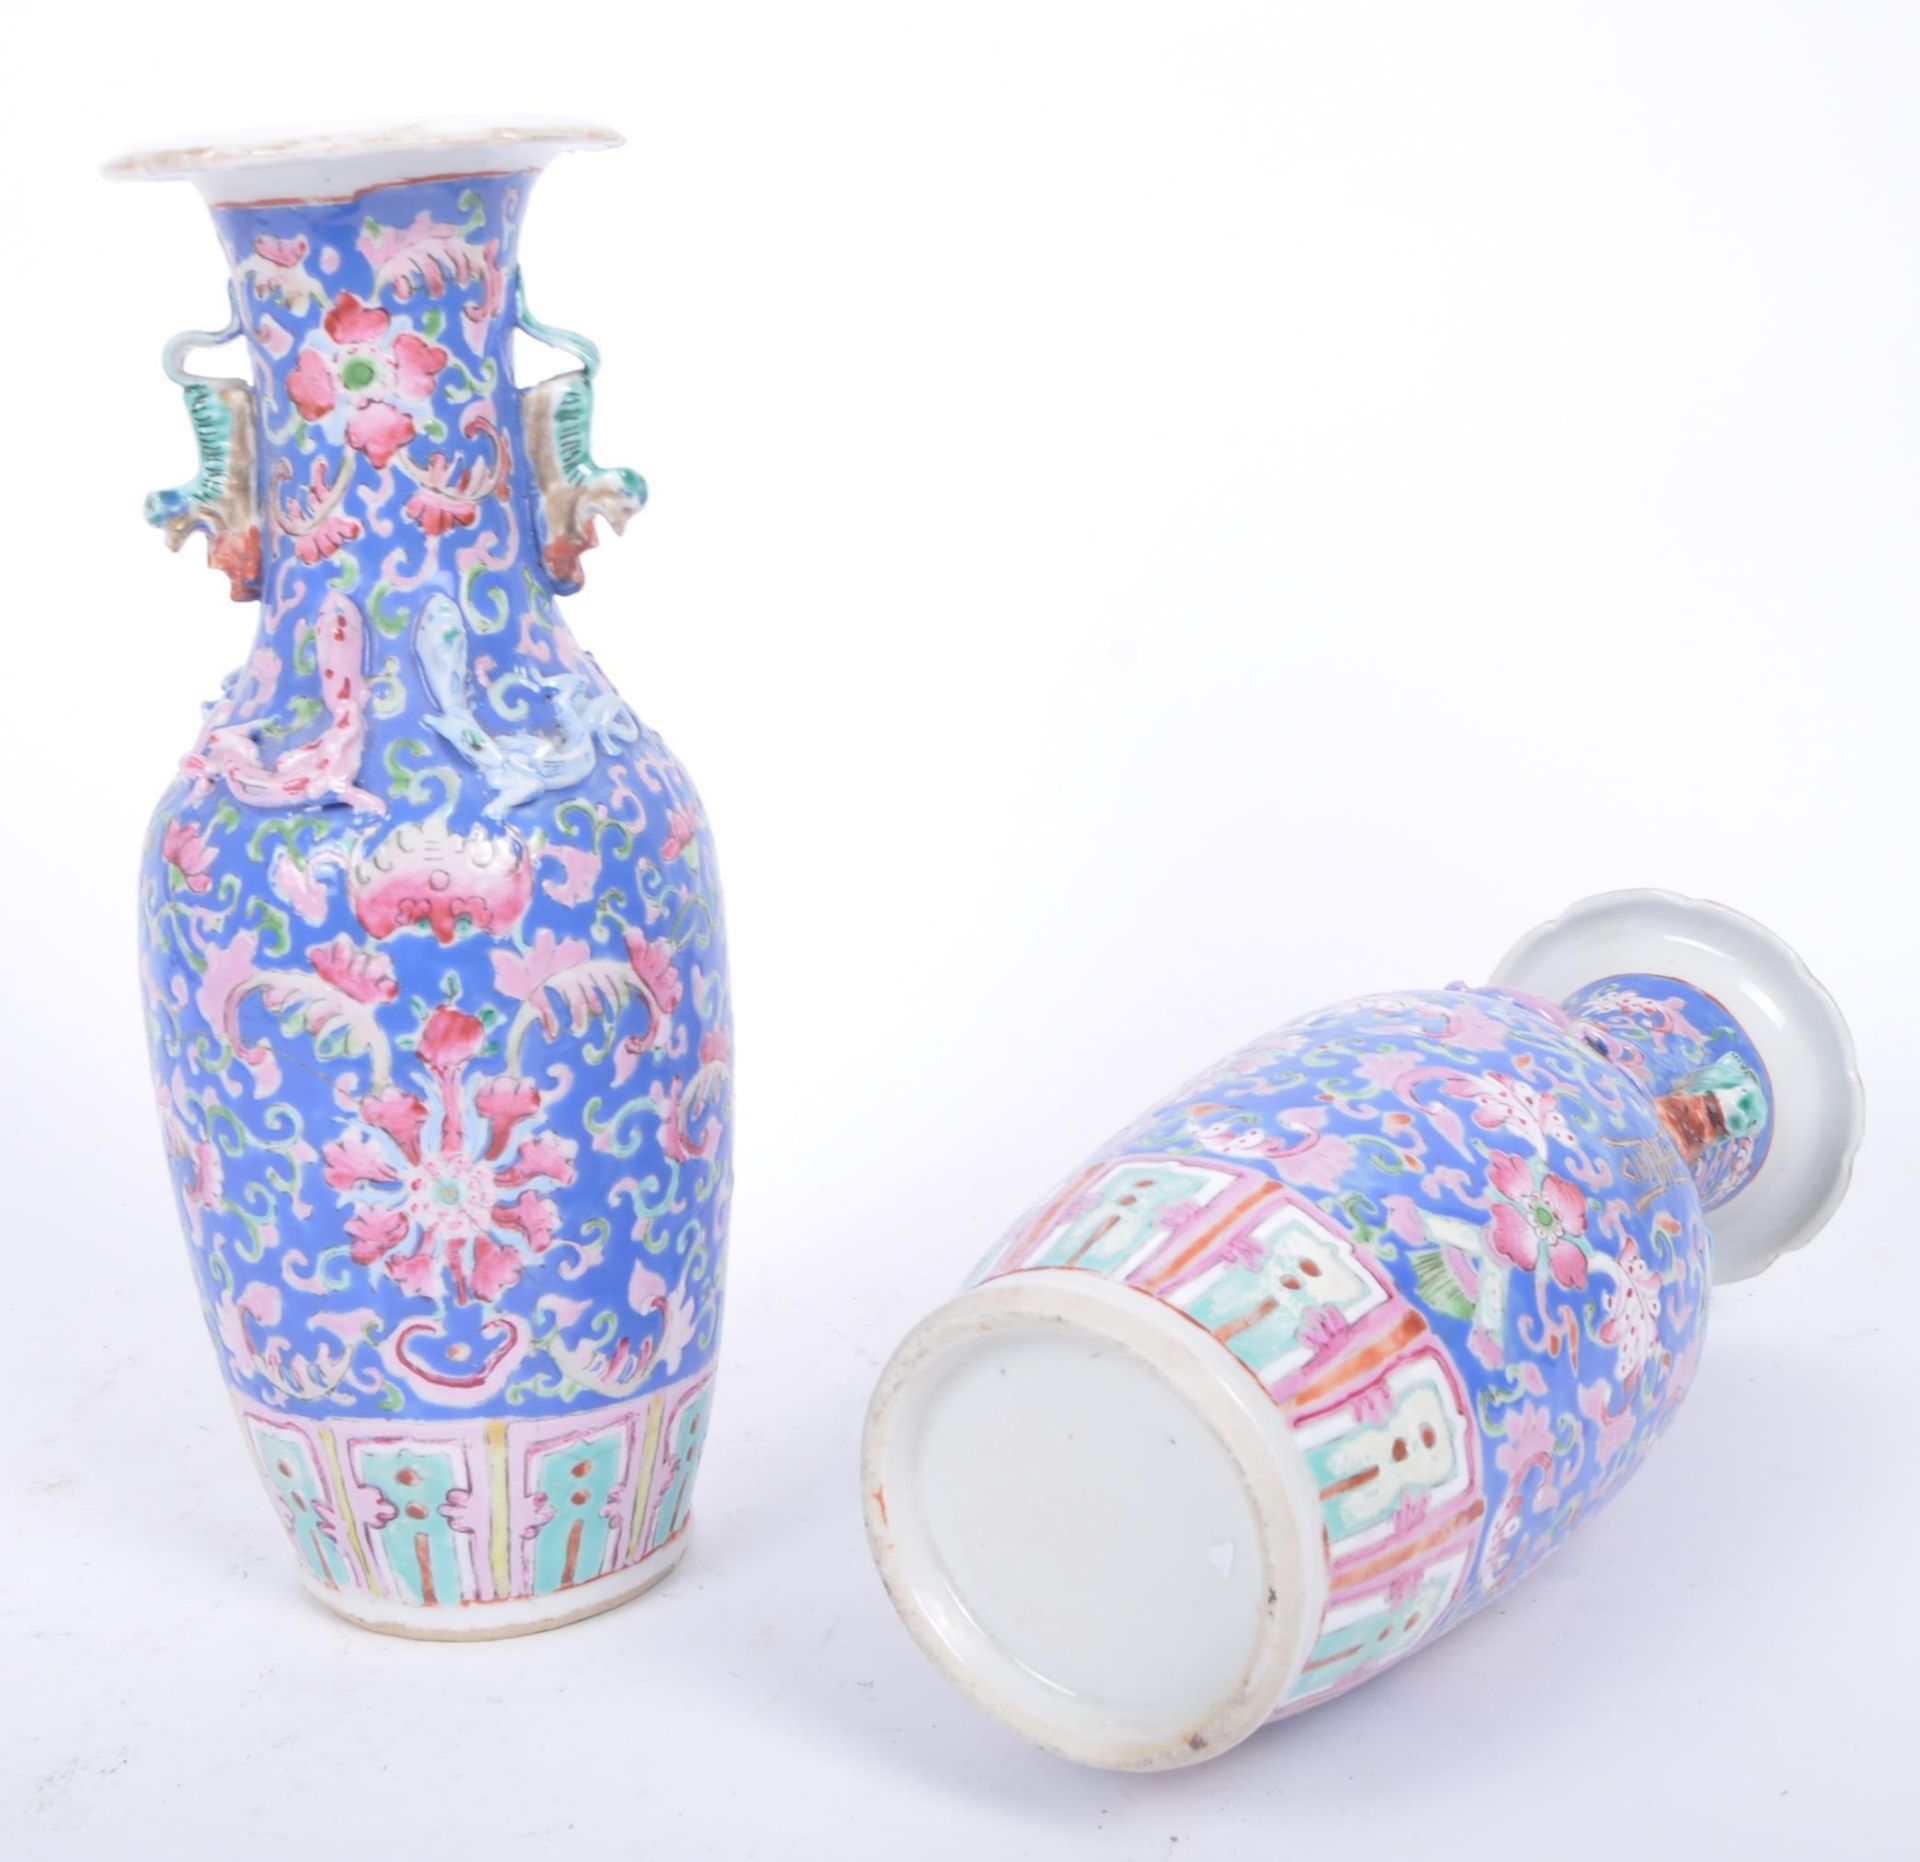 PAIR OF LATE 19TH CENTURY CHINESE CERAMIC FAMILLE ROSE VASES - Image 6 of 6